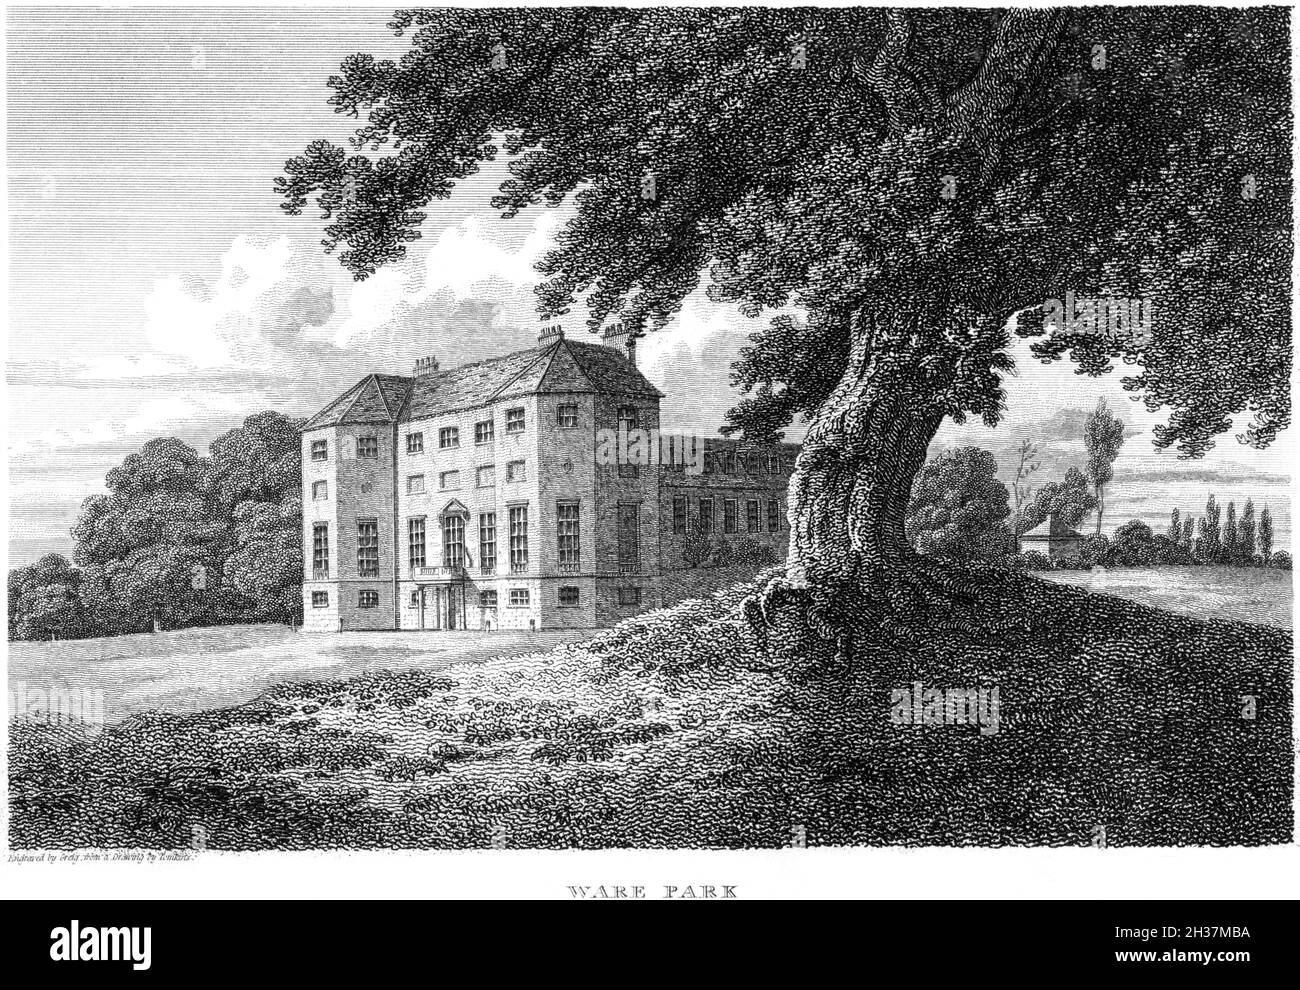 An engraving of Ware Park, Hertfordshire UK scanned at high resolution from a book printed in 1812.  Believed copyright free. Stock Photo